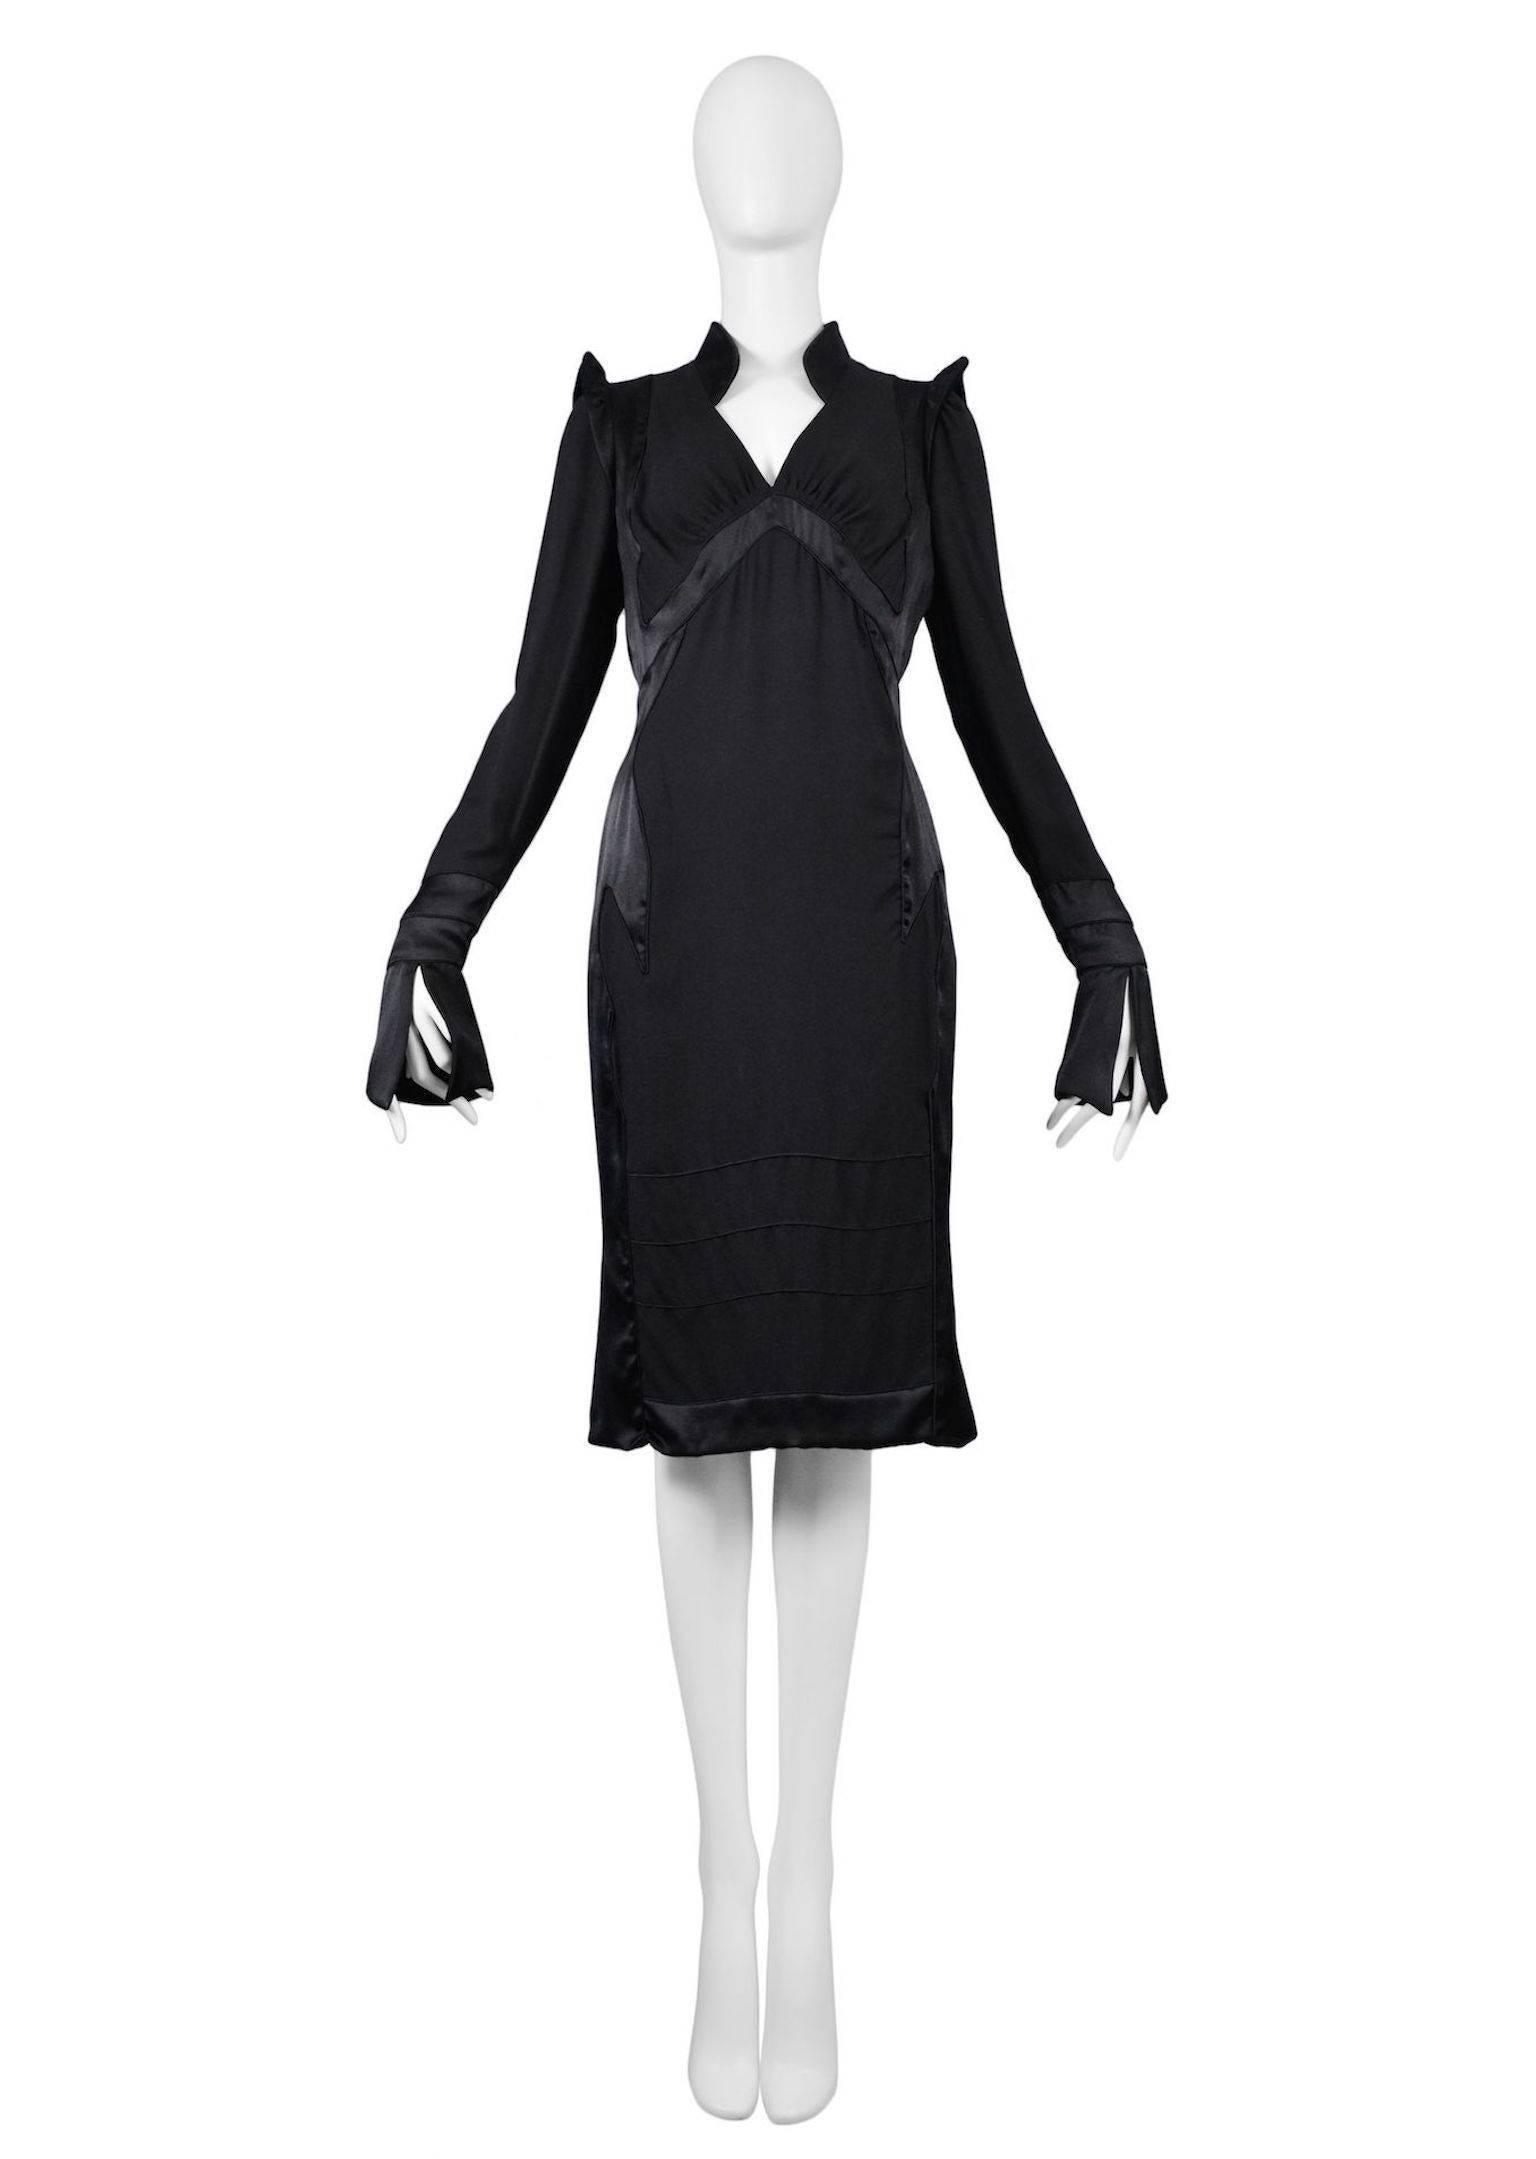 Vintage Tom Ford for Yves Saint Laurent black silk dress featuring structured collar and shoulder details with back zipper closure. Runway piece from the Autumn / Winter 2004 Collection. Please inquire for additional photographs.